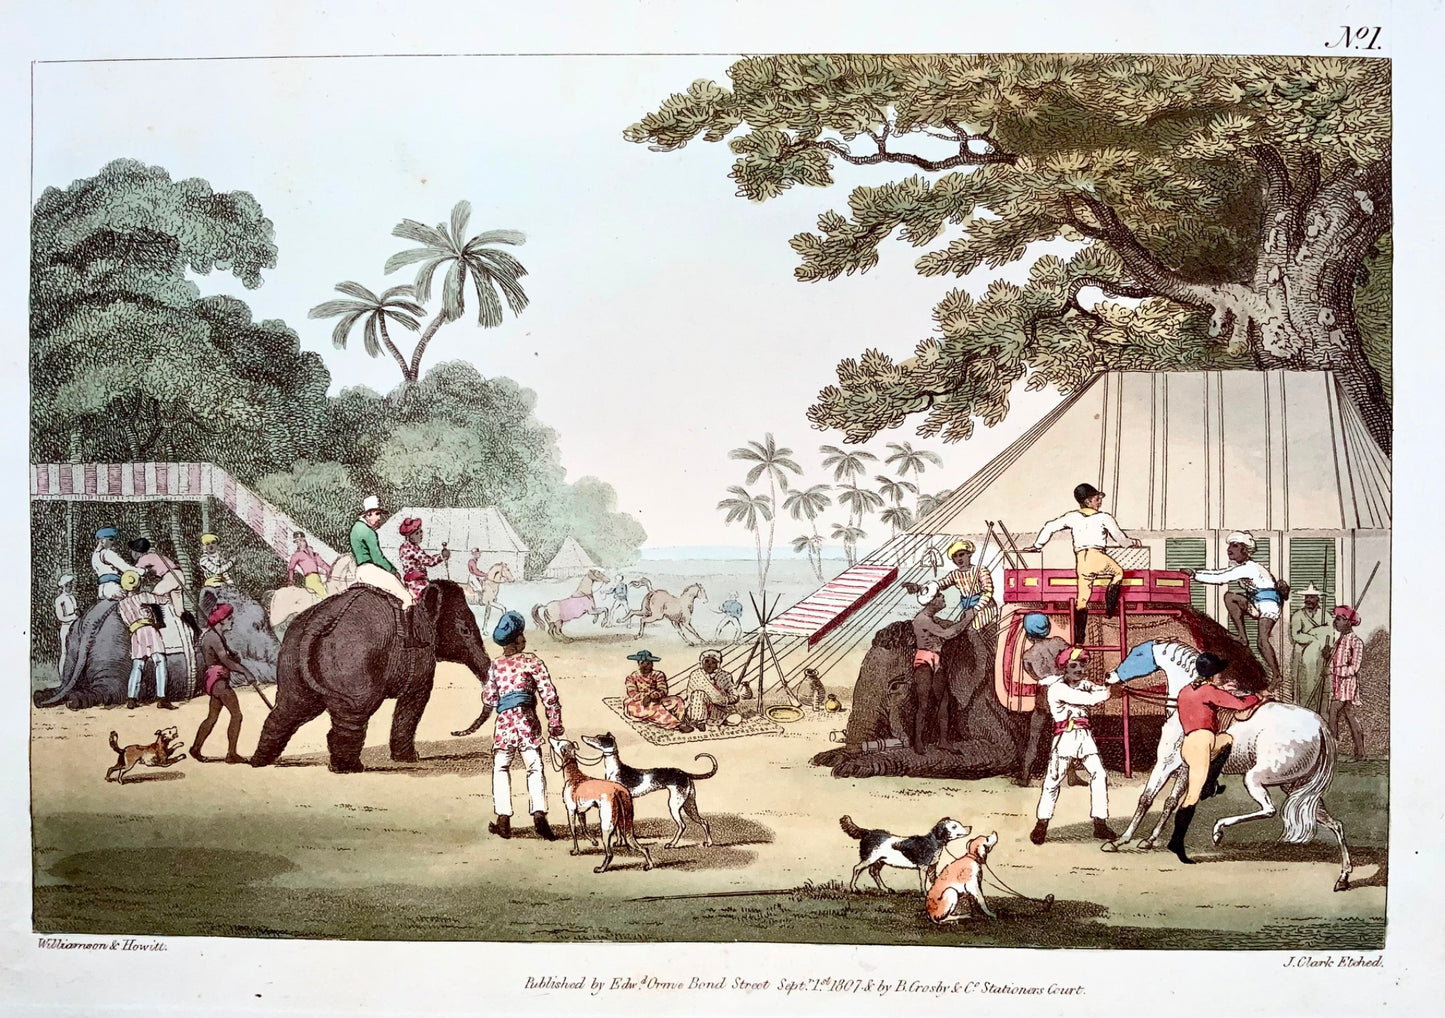 1807 Th. Williamson, Preparations for a Hunt, hand coloured aquatint, sports, india, foreign topography